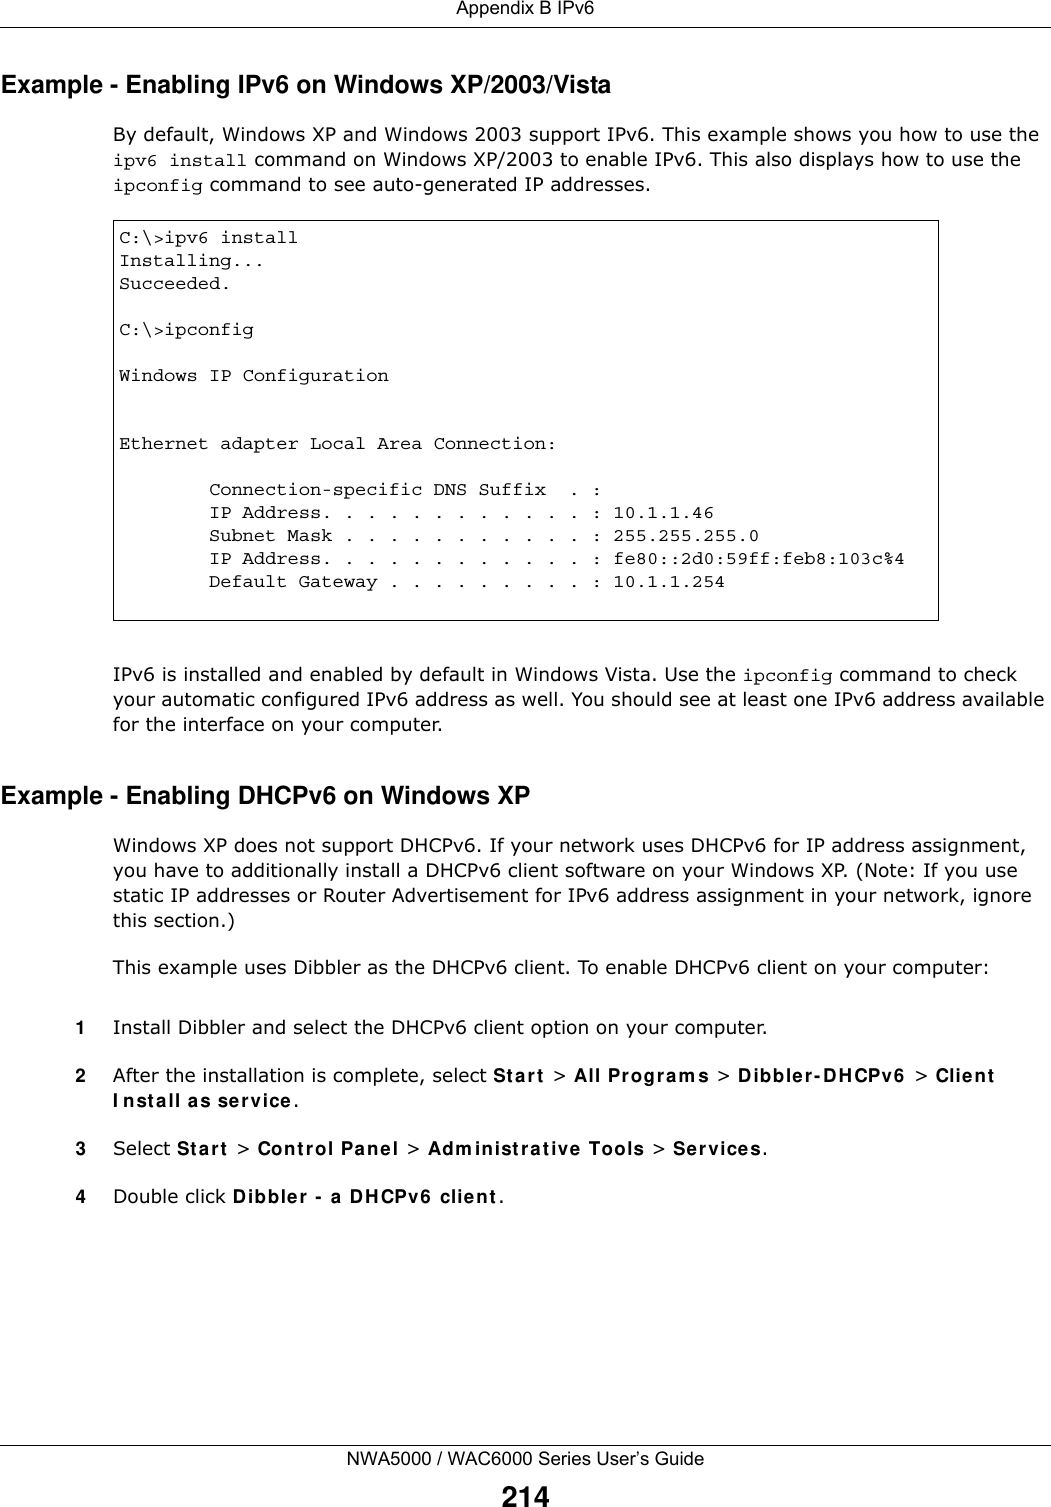 Appendix B IPv6NWA5000 / WAC6000 Series User’s Guide214Example - Enabling IPv6 on Windows XP/2003/VistaBy default, Windows XP and Windows 2003 support IPv6. This example shows you how to use the ipv6 install command on Windows XP/2003 to enable IPv6. This also displays how to use the ipconfig command to see auto-generated IP addresses.IPv6 is installed and enabled by default in Windows Vista. Use the ipconfig command to check your automatic configured IPv6 address as well. You should see at least one IPv6 address available for the interface on your computer.Example - Enabling DHCPv6 on Windows XPWindows XP does not support DHCPv6. If your network uses DHCPv6 for IP address assignment, you have to additionally install a DHCPv6 client software on your Windows XP. (Note: If you use static IP addresses or Router Advertisement for IPv6 address assignment in your network, ignore this section.)This example uses Dibbler as the DHCPv6 client. To enable DHCPv6 client on your computer:1Install Dibbler and select the DHCPv6 client option on your computer.2After the installation is complete, select Start &gt; All Programs &gt; Dibbler-DHCPv6 &gt; Client Install as service.3Select Start &gt; Control Panel &gt; Administrative Tools &gt; Services.4Double click Dibbler - a DHCPv6 client.C:\&gt;ipv6 installInstalling...Succeeded.C:\&gt;ipconfigWindows IP ConfigurationEthernet adapter Local Area Connection:        Connection-specific DNS Suffix  . :         IP Address. . . . . . . . . . . . : 10.1.1.46        Subnet Mask . . . . . . . . . . . : 255.255.255.0        IP Address. . . . . . . . . . . . : fe80::2d0:59ff:feb8:103c%4        Default Gateway . . . . . . . . . : 10.1.1.254